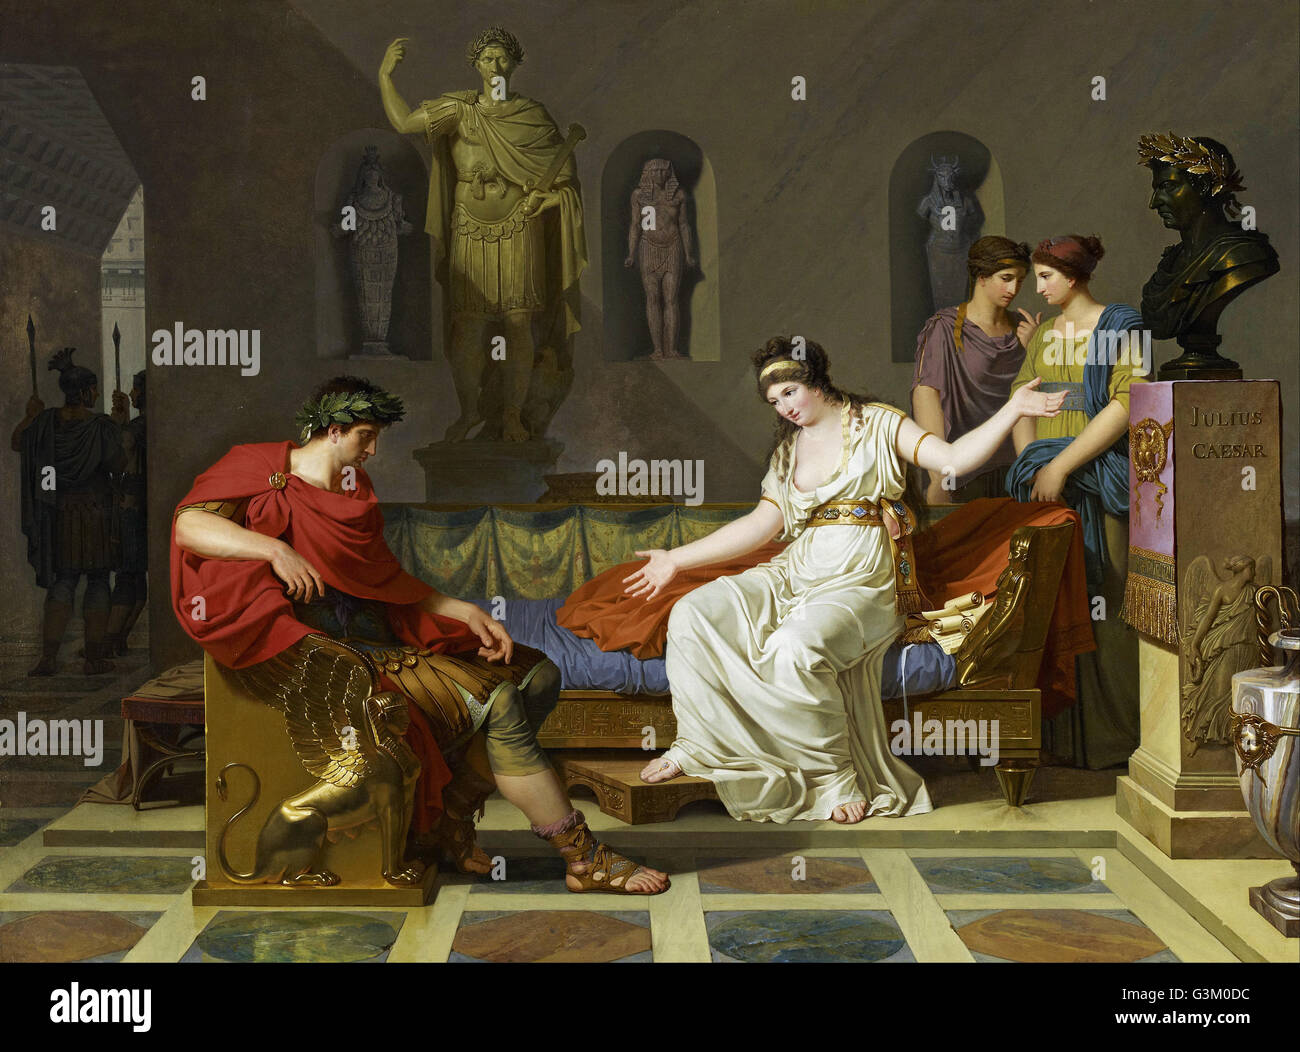 Louis Gauffier - Cleopatra and Octavian  - Stock Photo